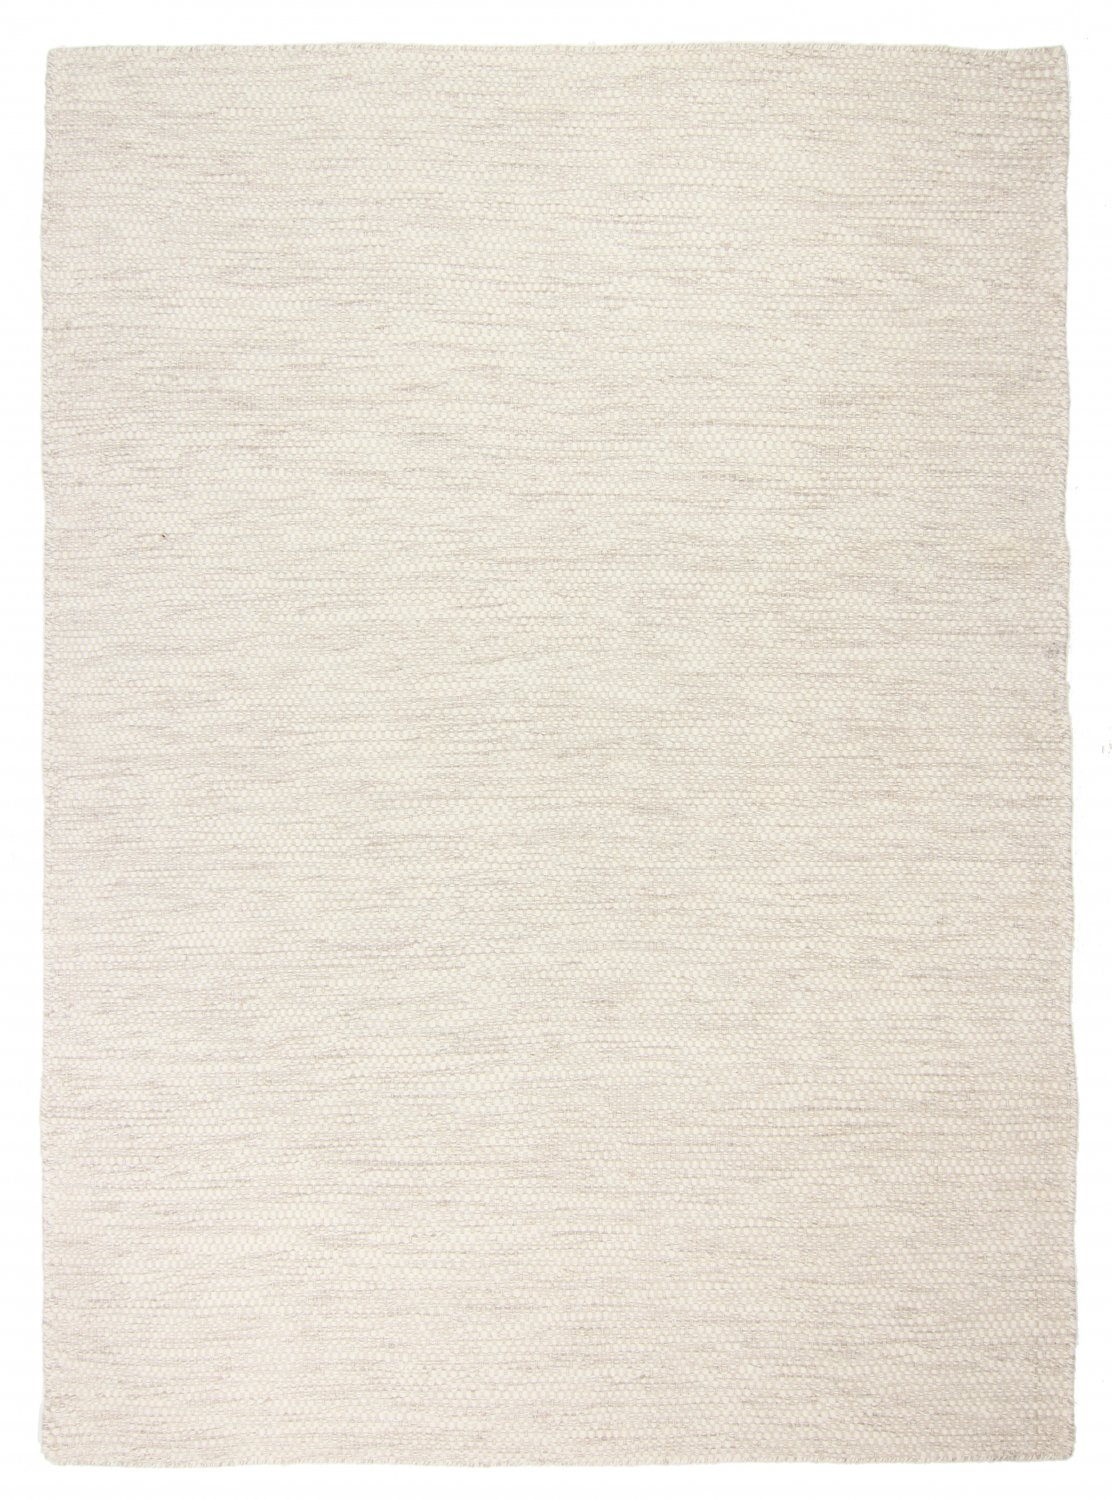 100% Pure Wool Rug Woven By Hand 7mm Thick COASTAL Nature 